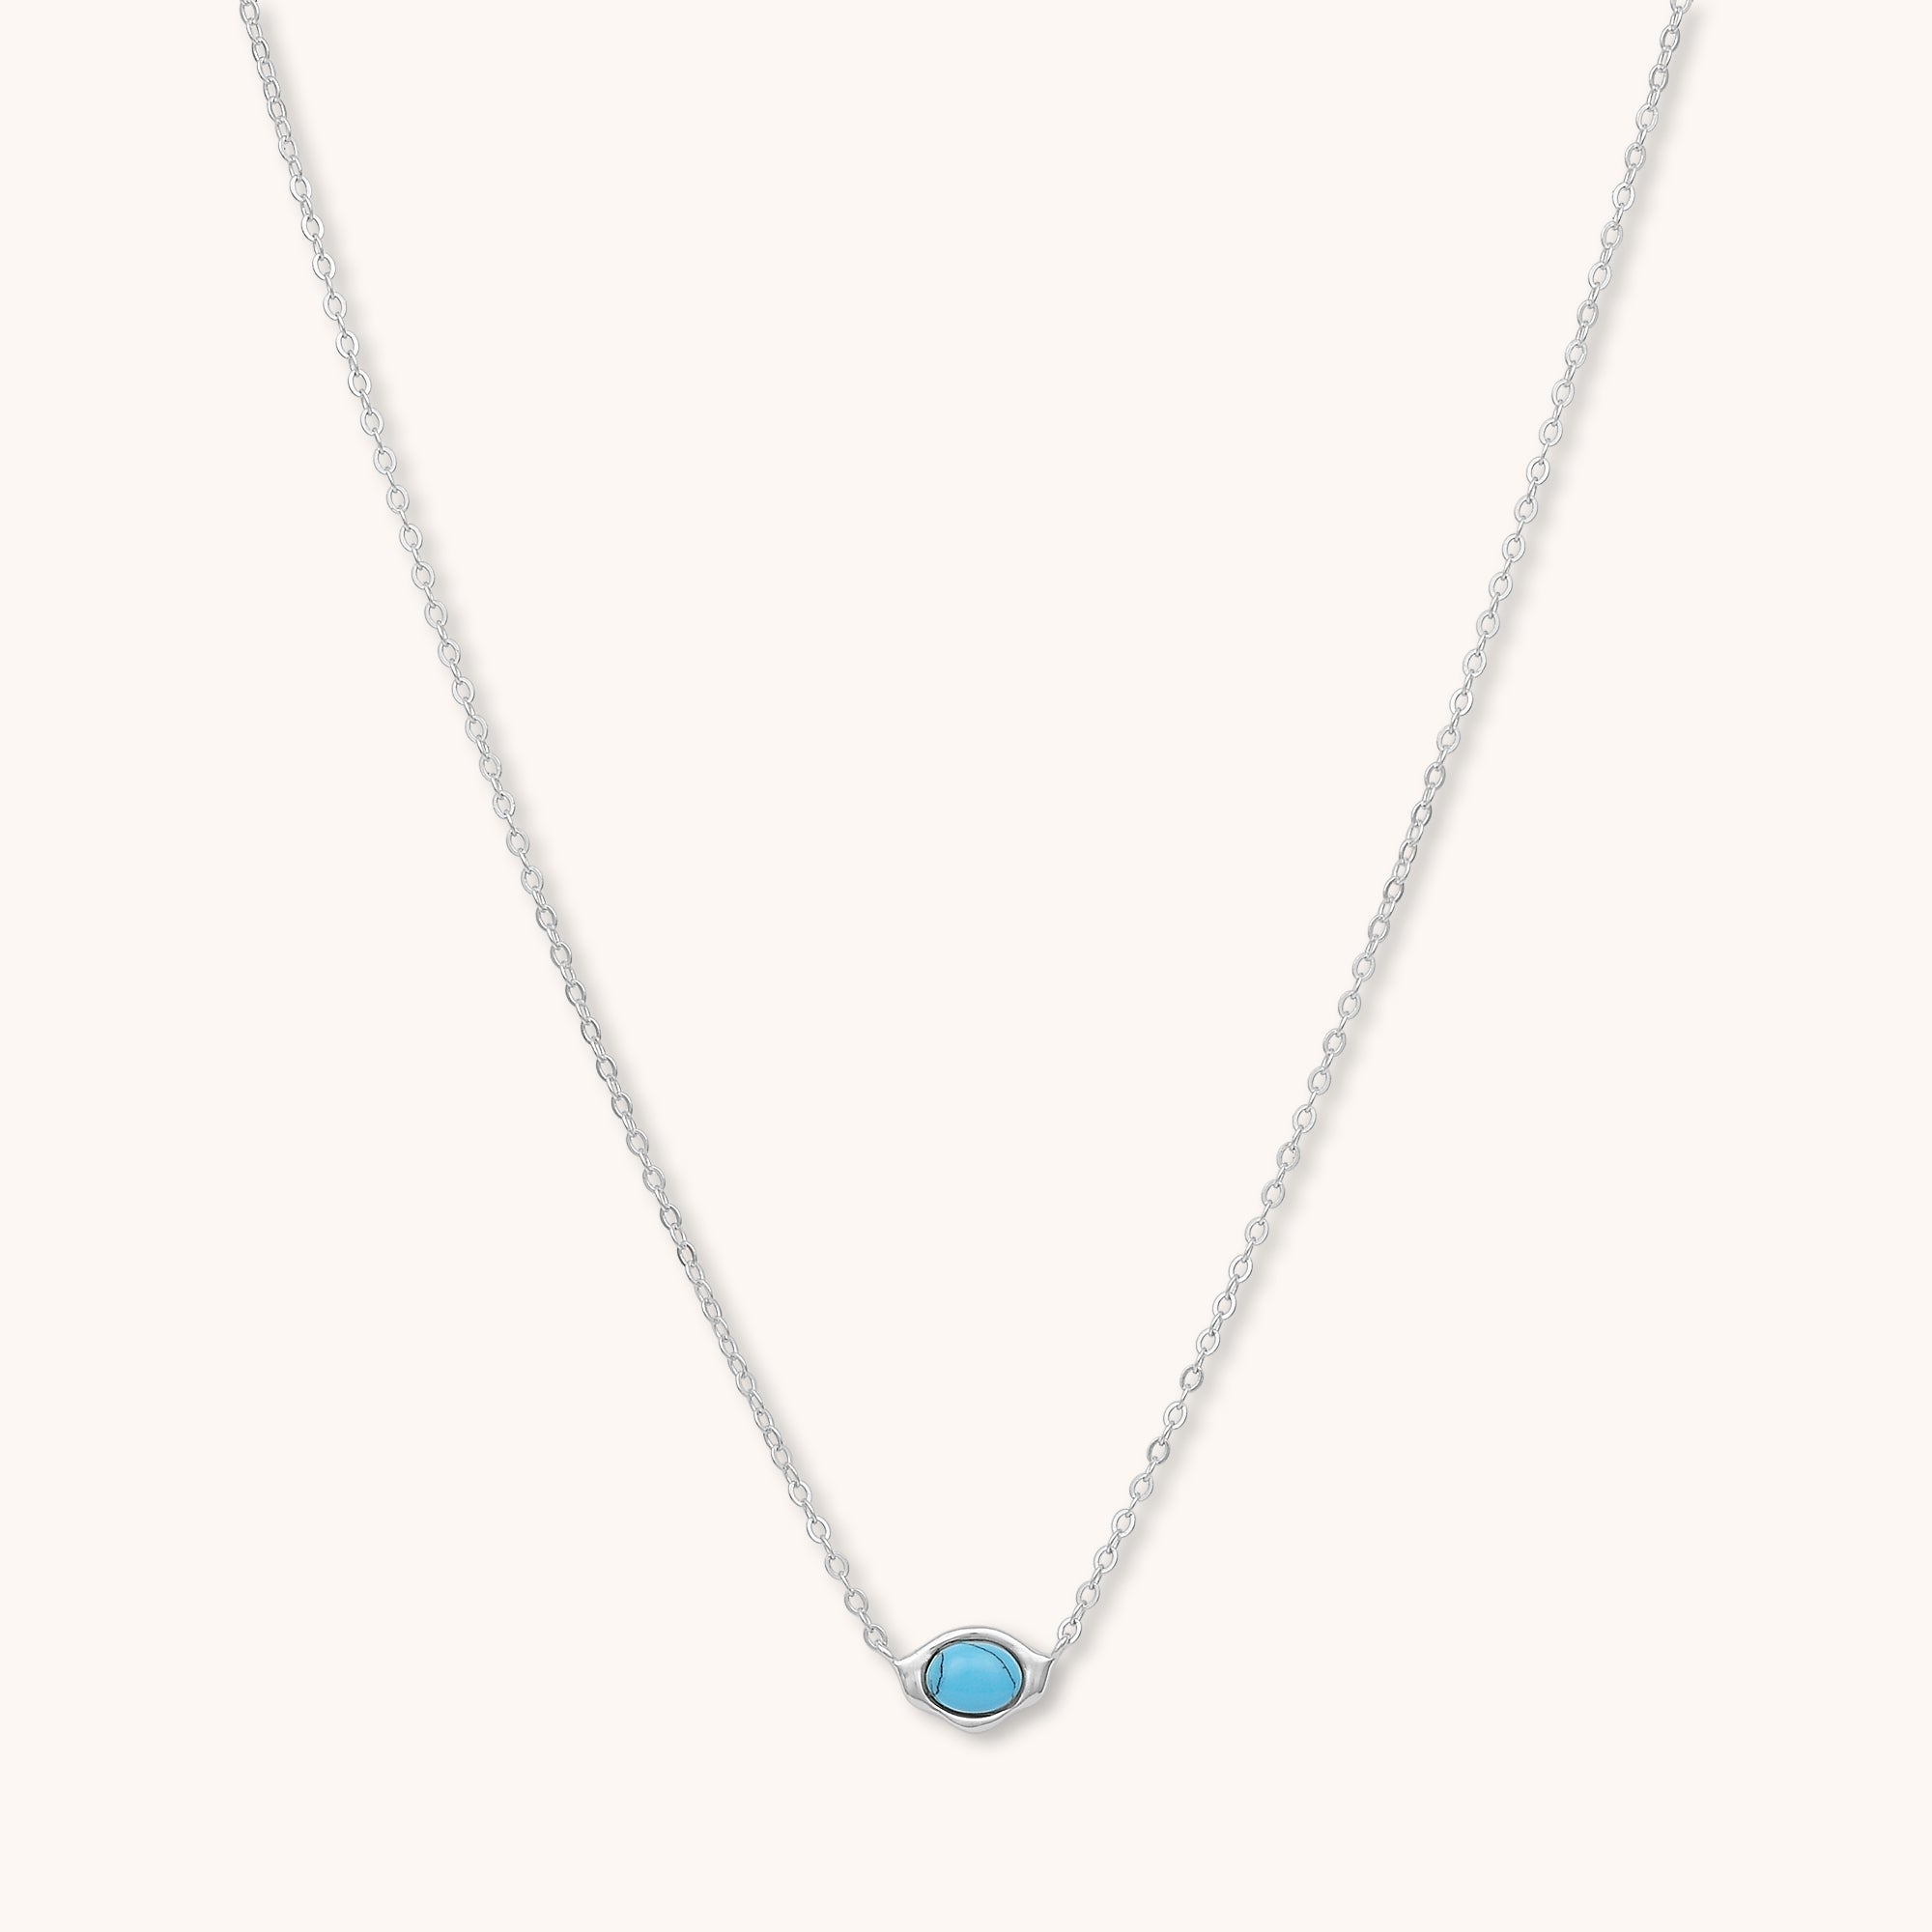 Turquoise Eye Necklace Silver